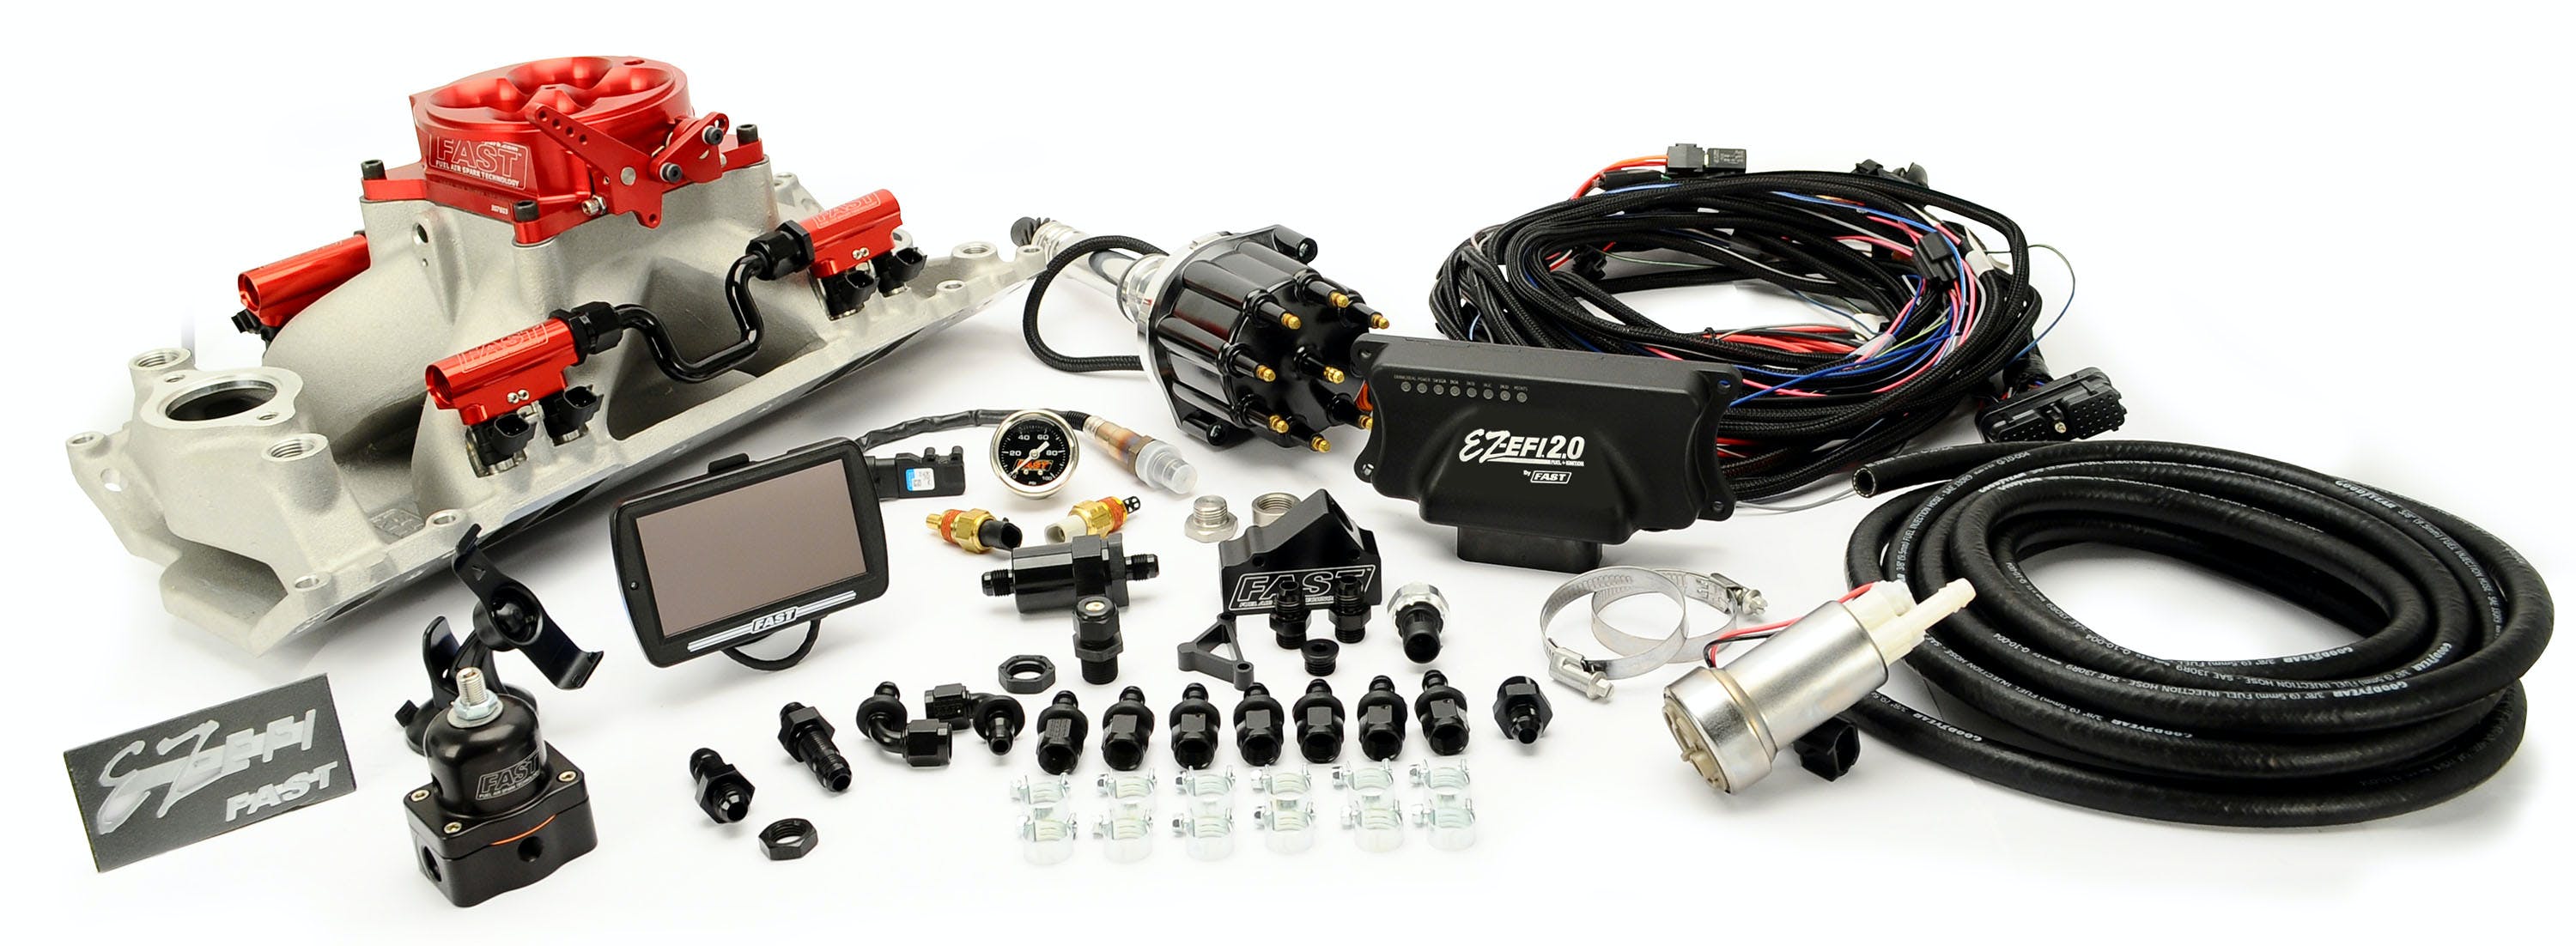 FAST - Fuel Air Spark Technology 30431-10L EZ 2.0 SBF Multiport w/intake, rails, throttle body, distributor and fuel pump